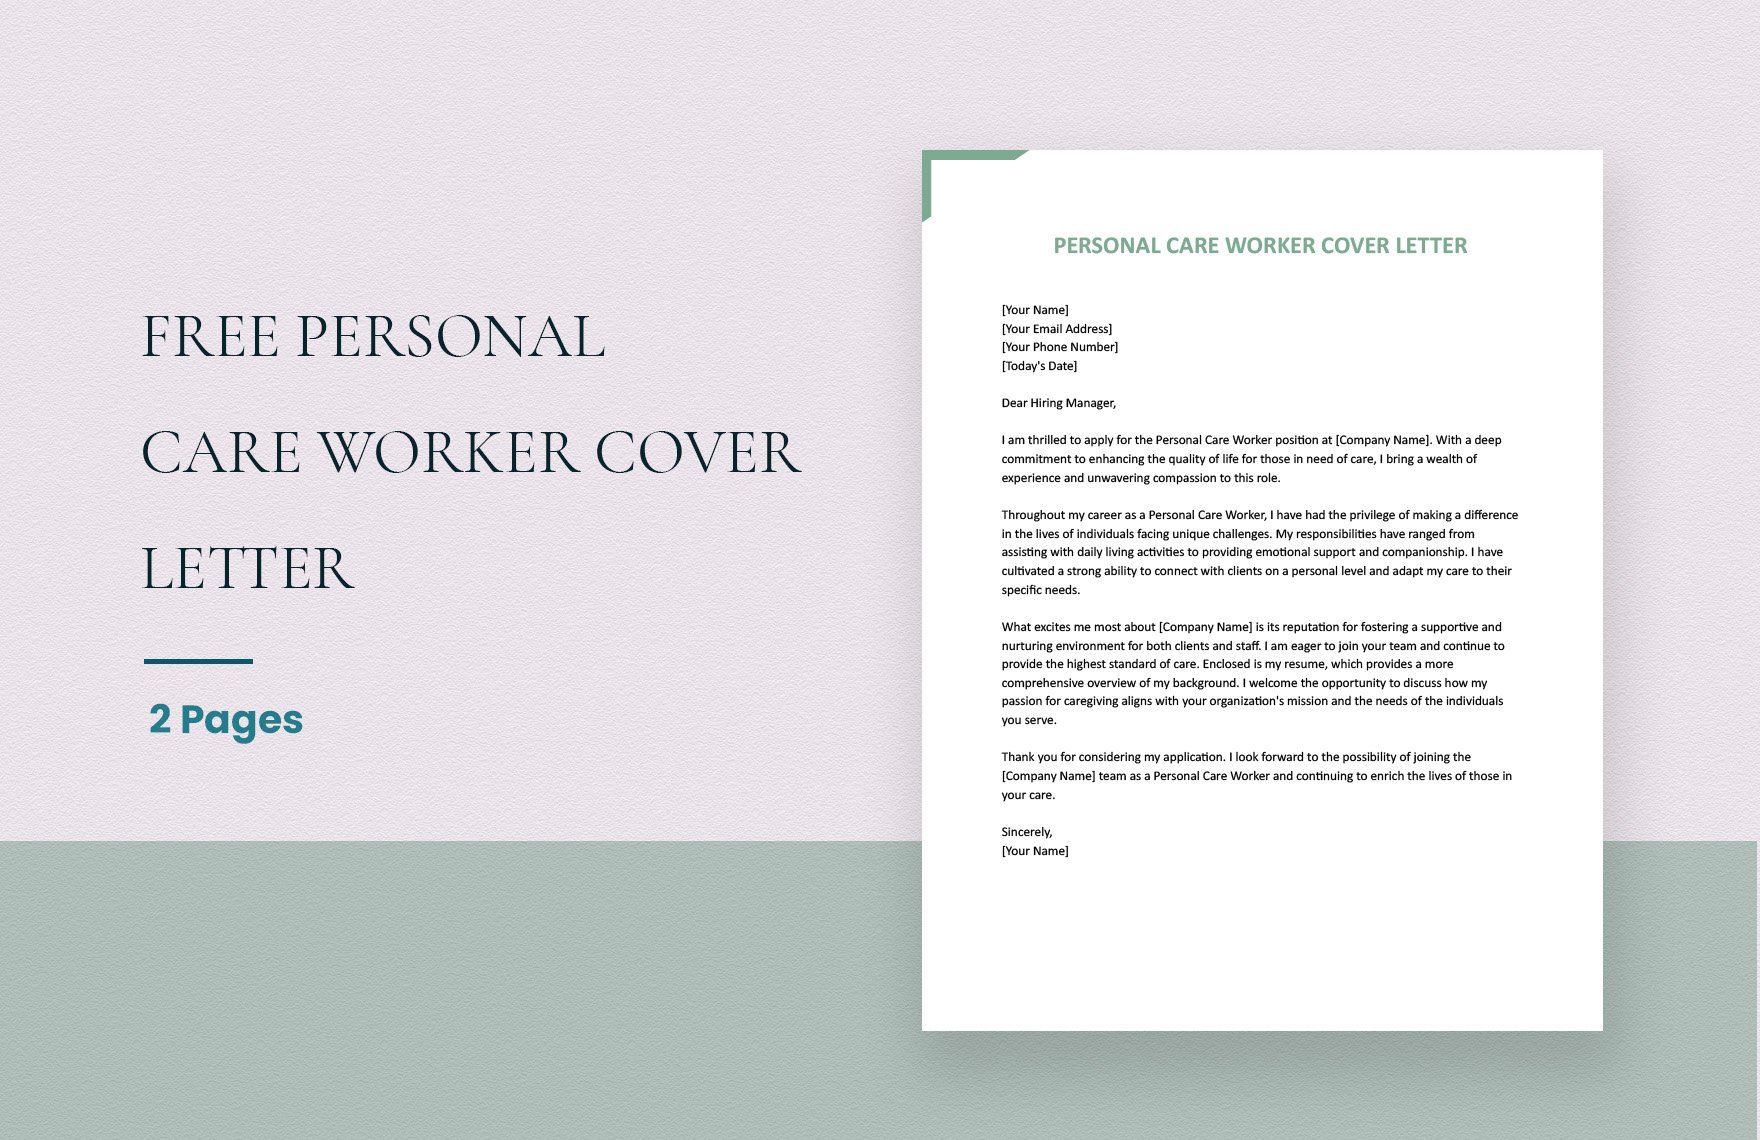 Personal Care Worker Cover Letter